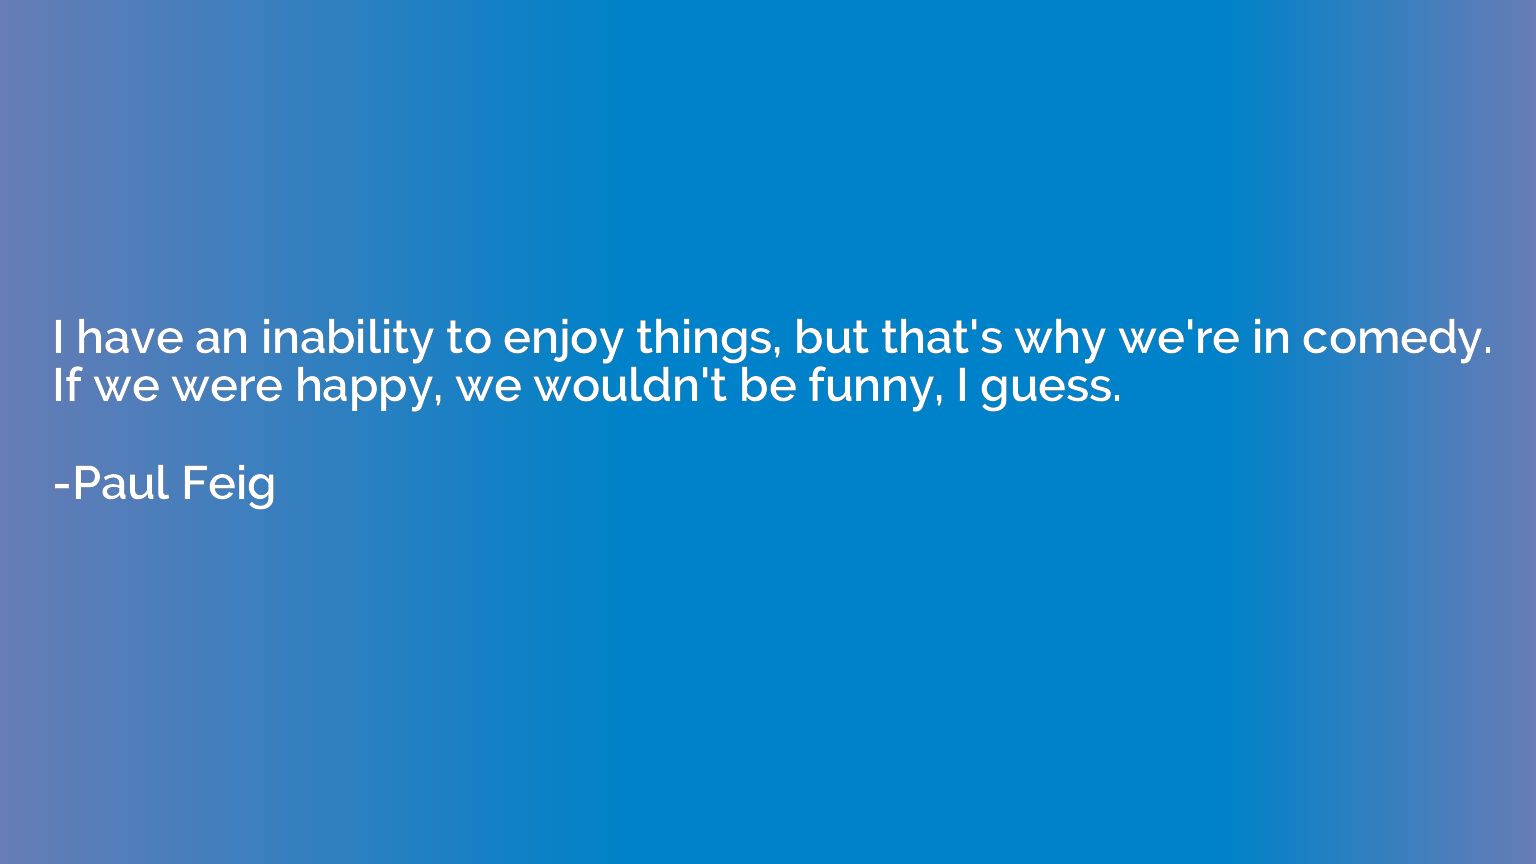 I have an inability to enjoy things, but that's why we're in